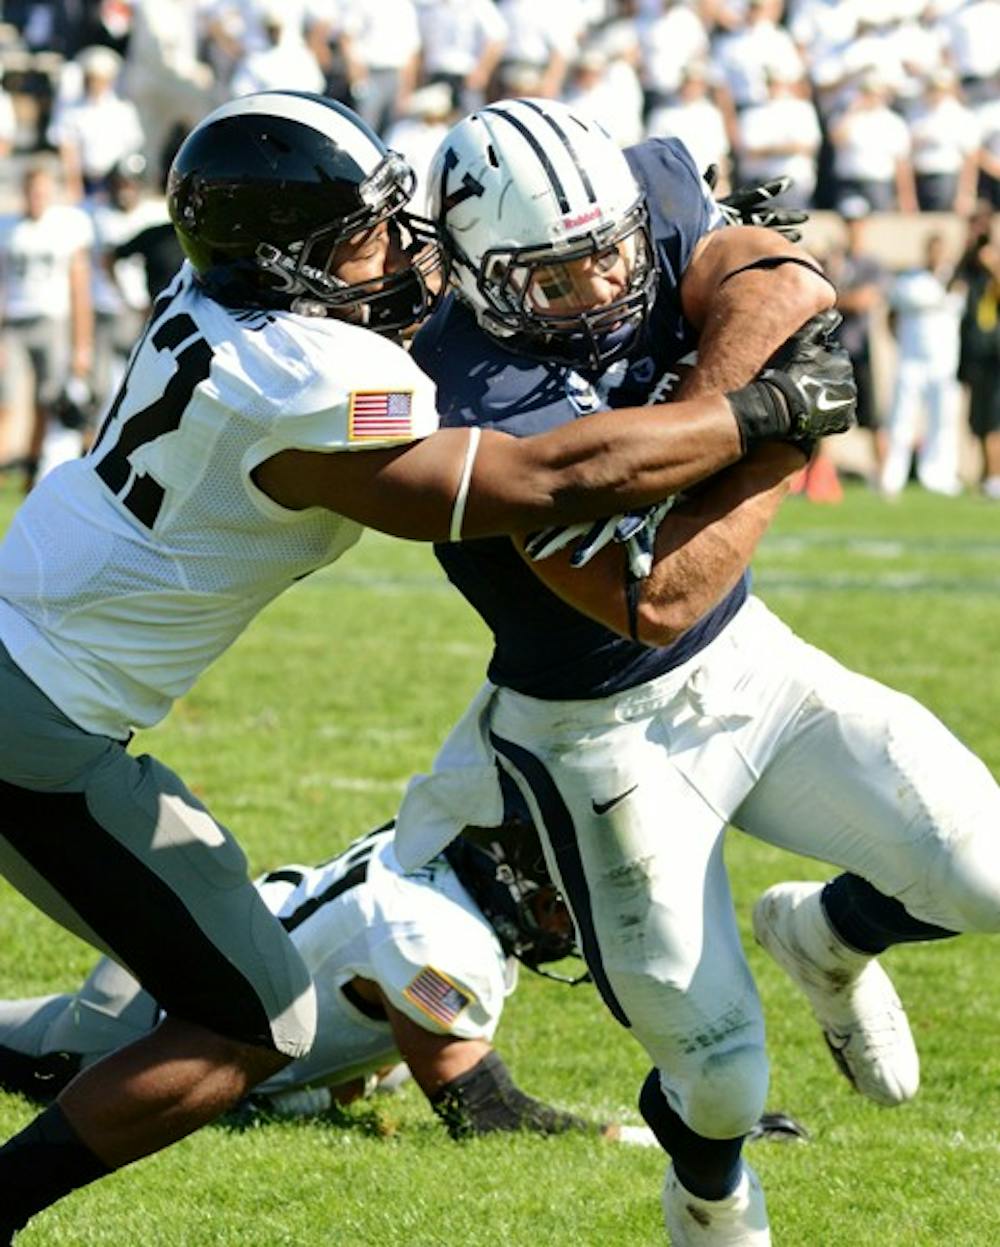 Yale senior running back Tyler Vargas had one of the best games of his career on Saturday, rushing for five touchdowns against Army.